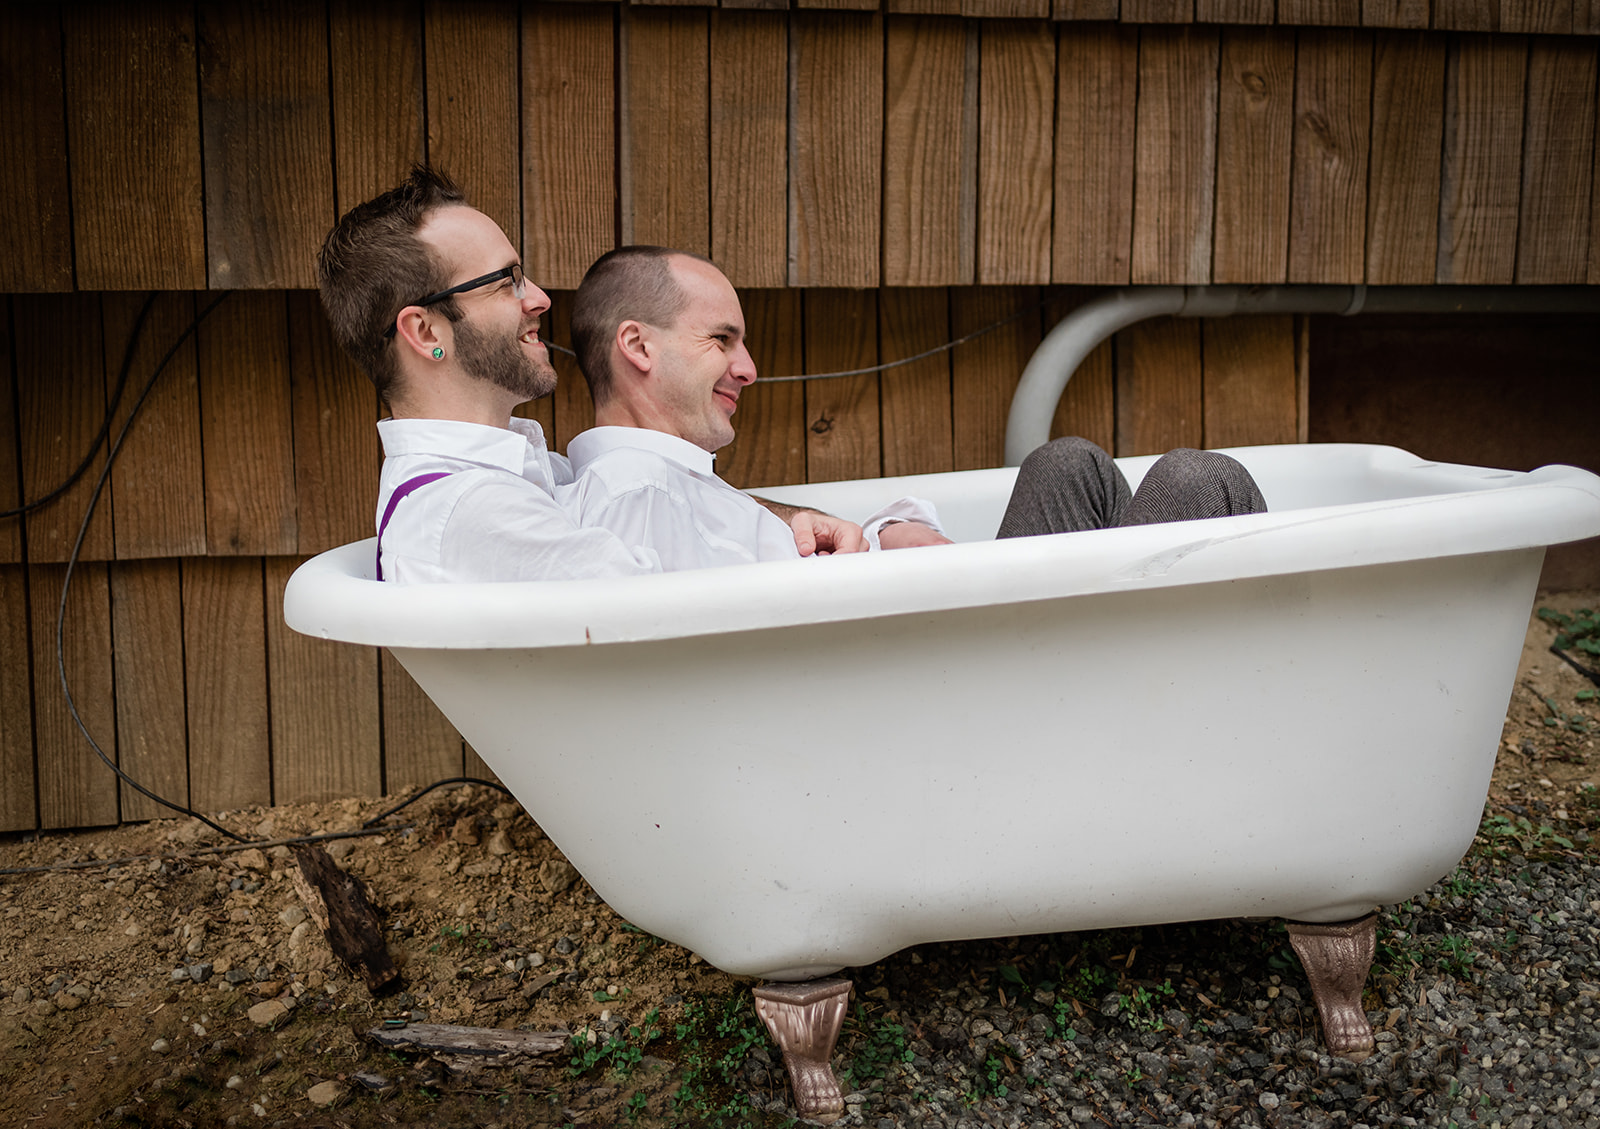 This is a picture of two men laying in a tub together outside. They are fully dressed and laughing together.